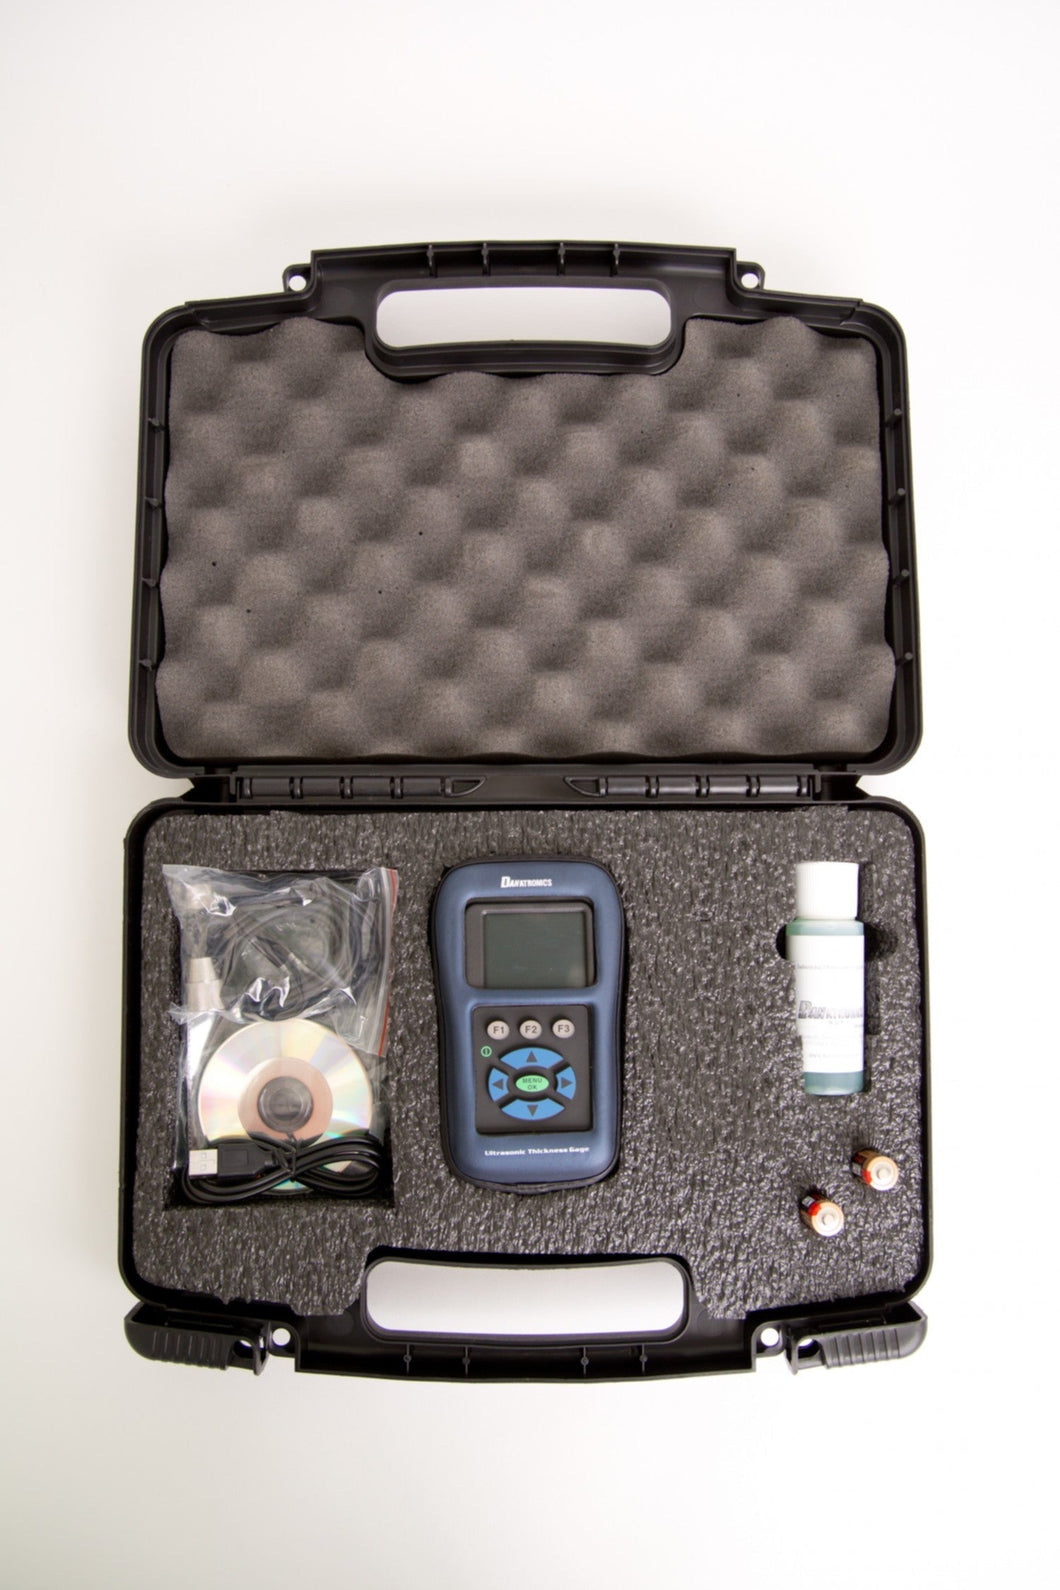 EHC 09 DLW in Carry case, Ultrasonic Thickness gauge